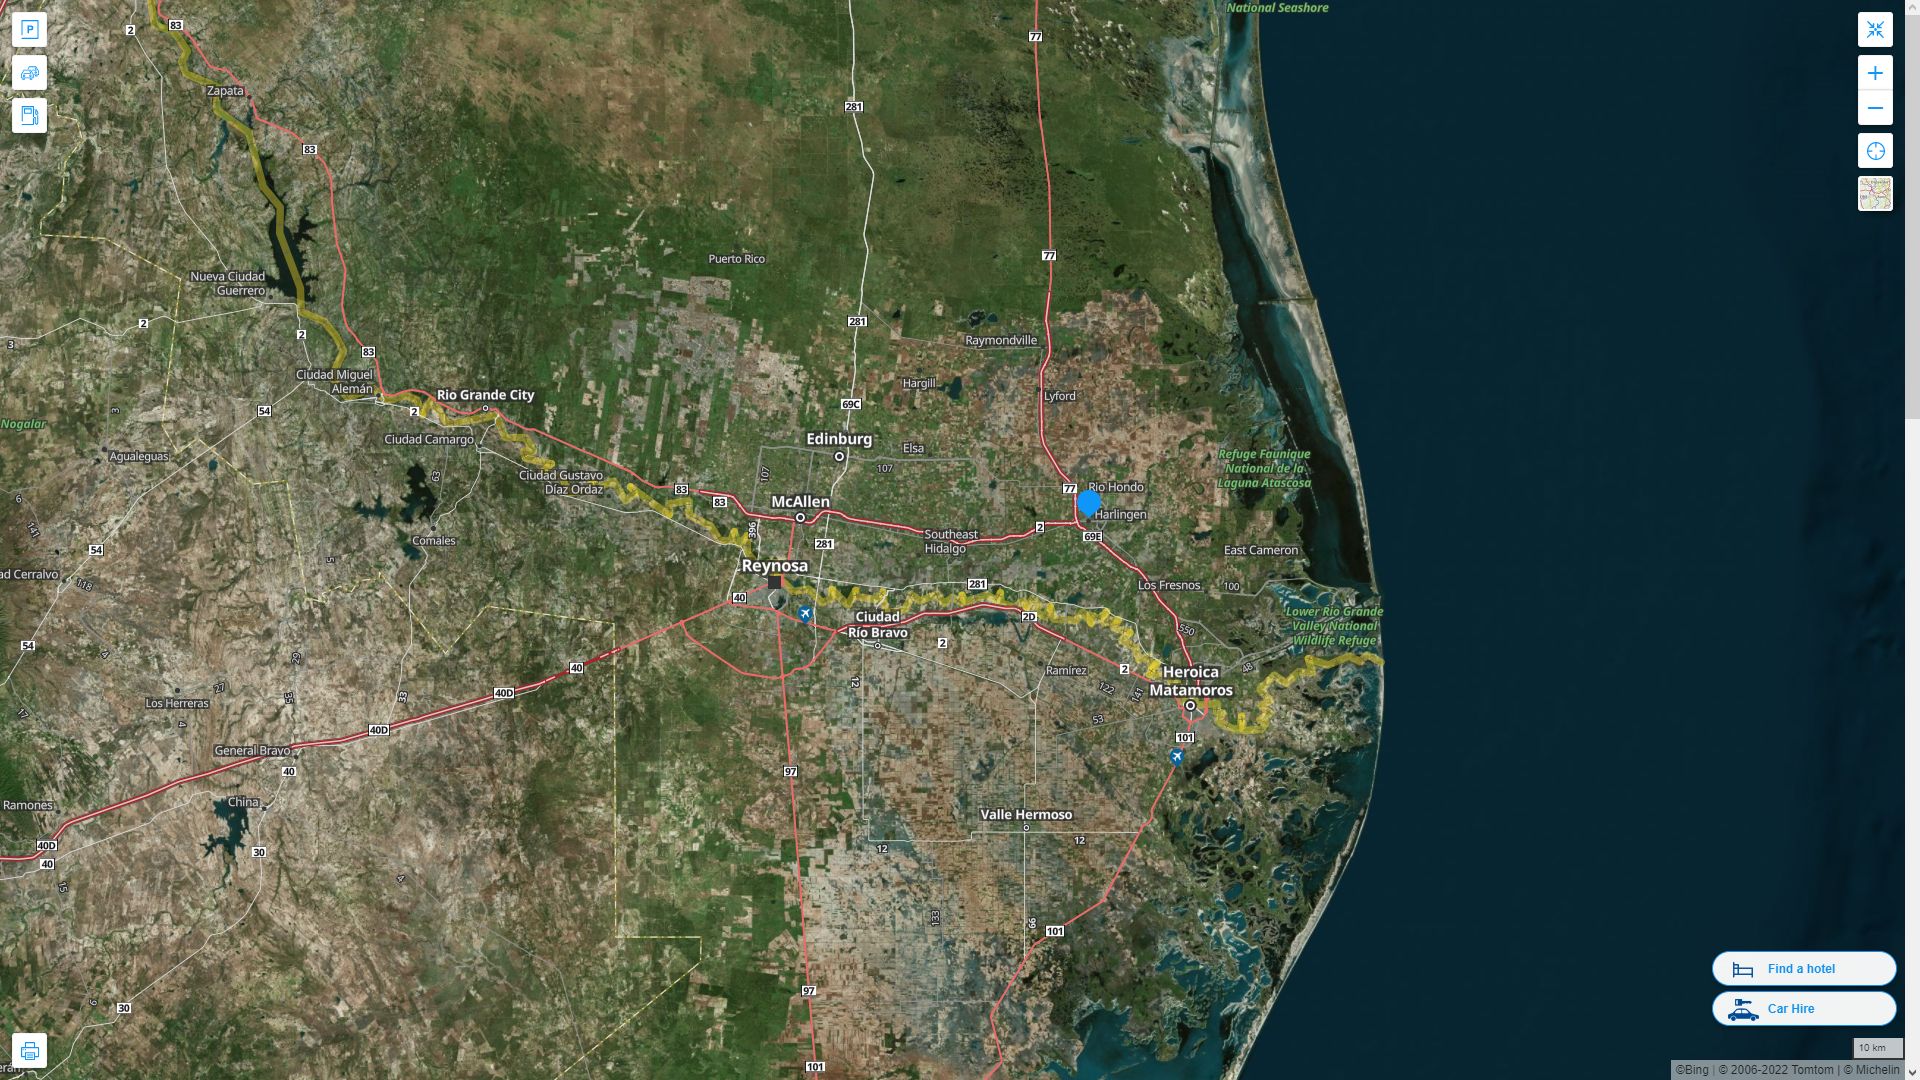 Harlingen Texas Highway and Road Map with Satellite View